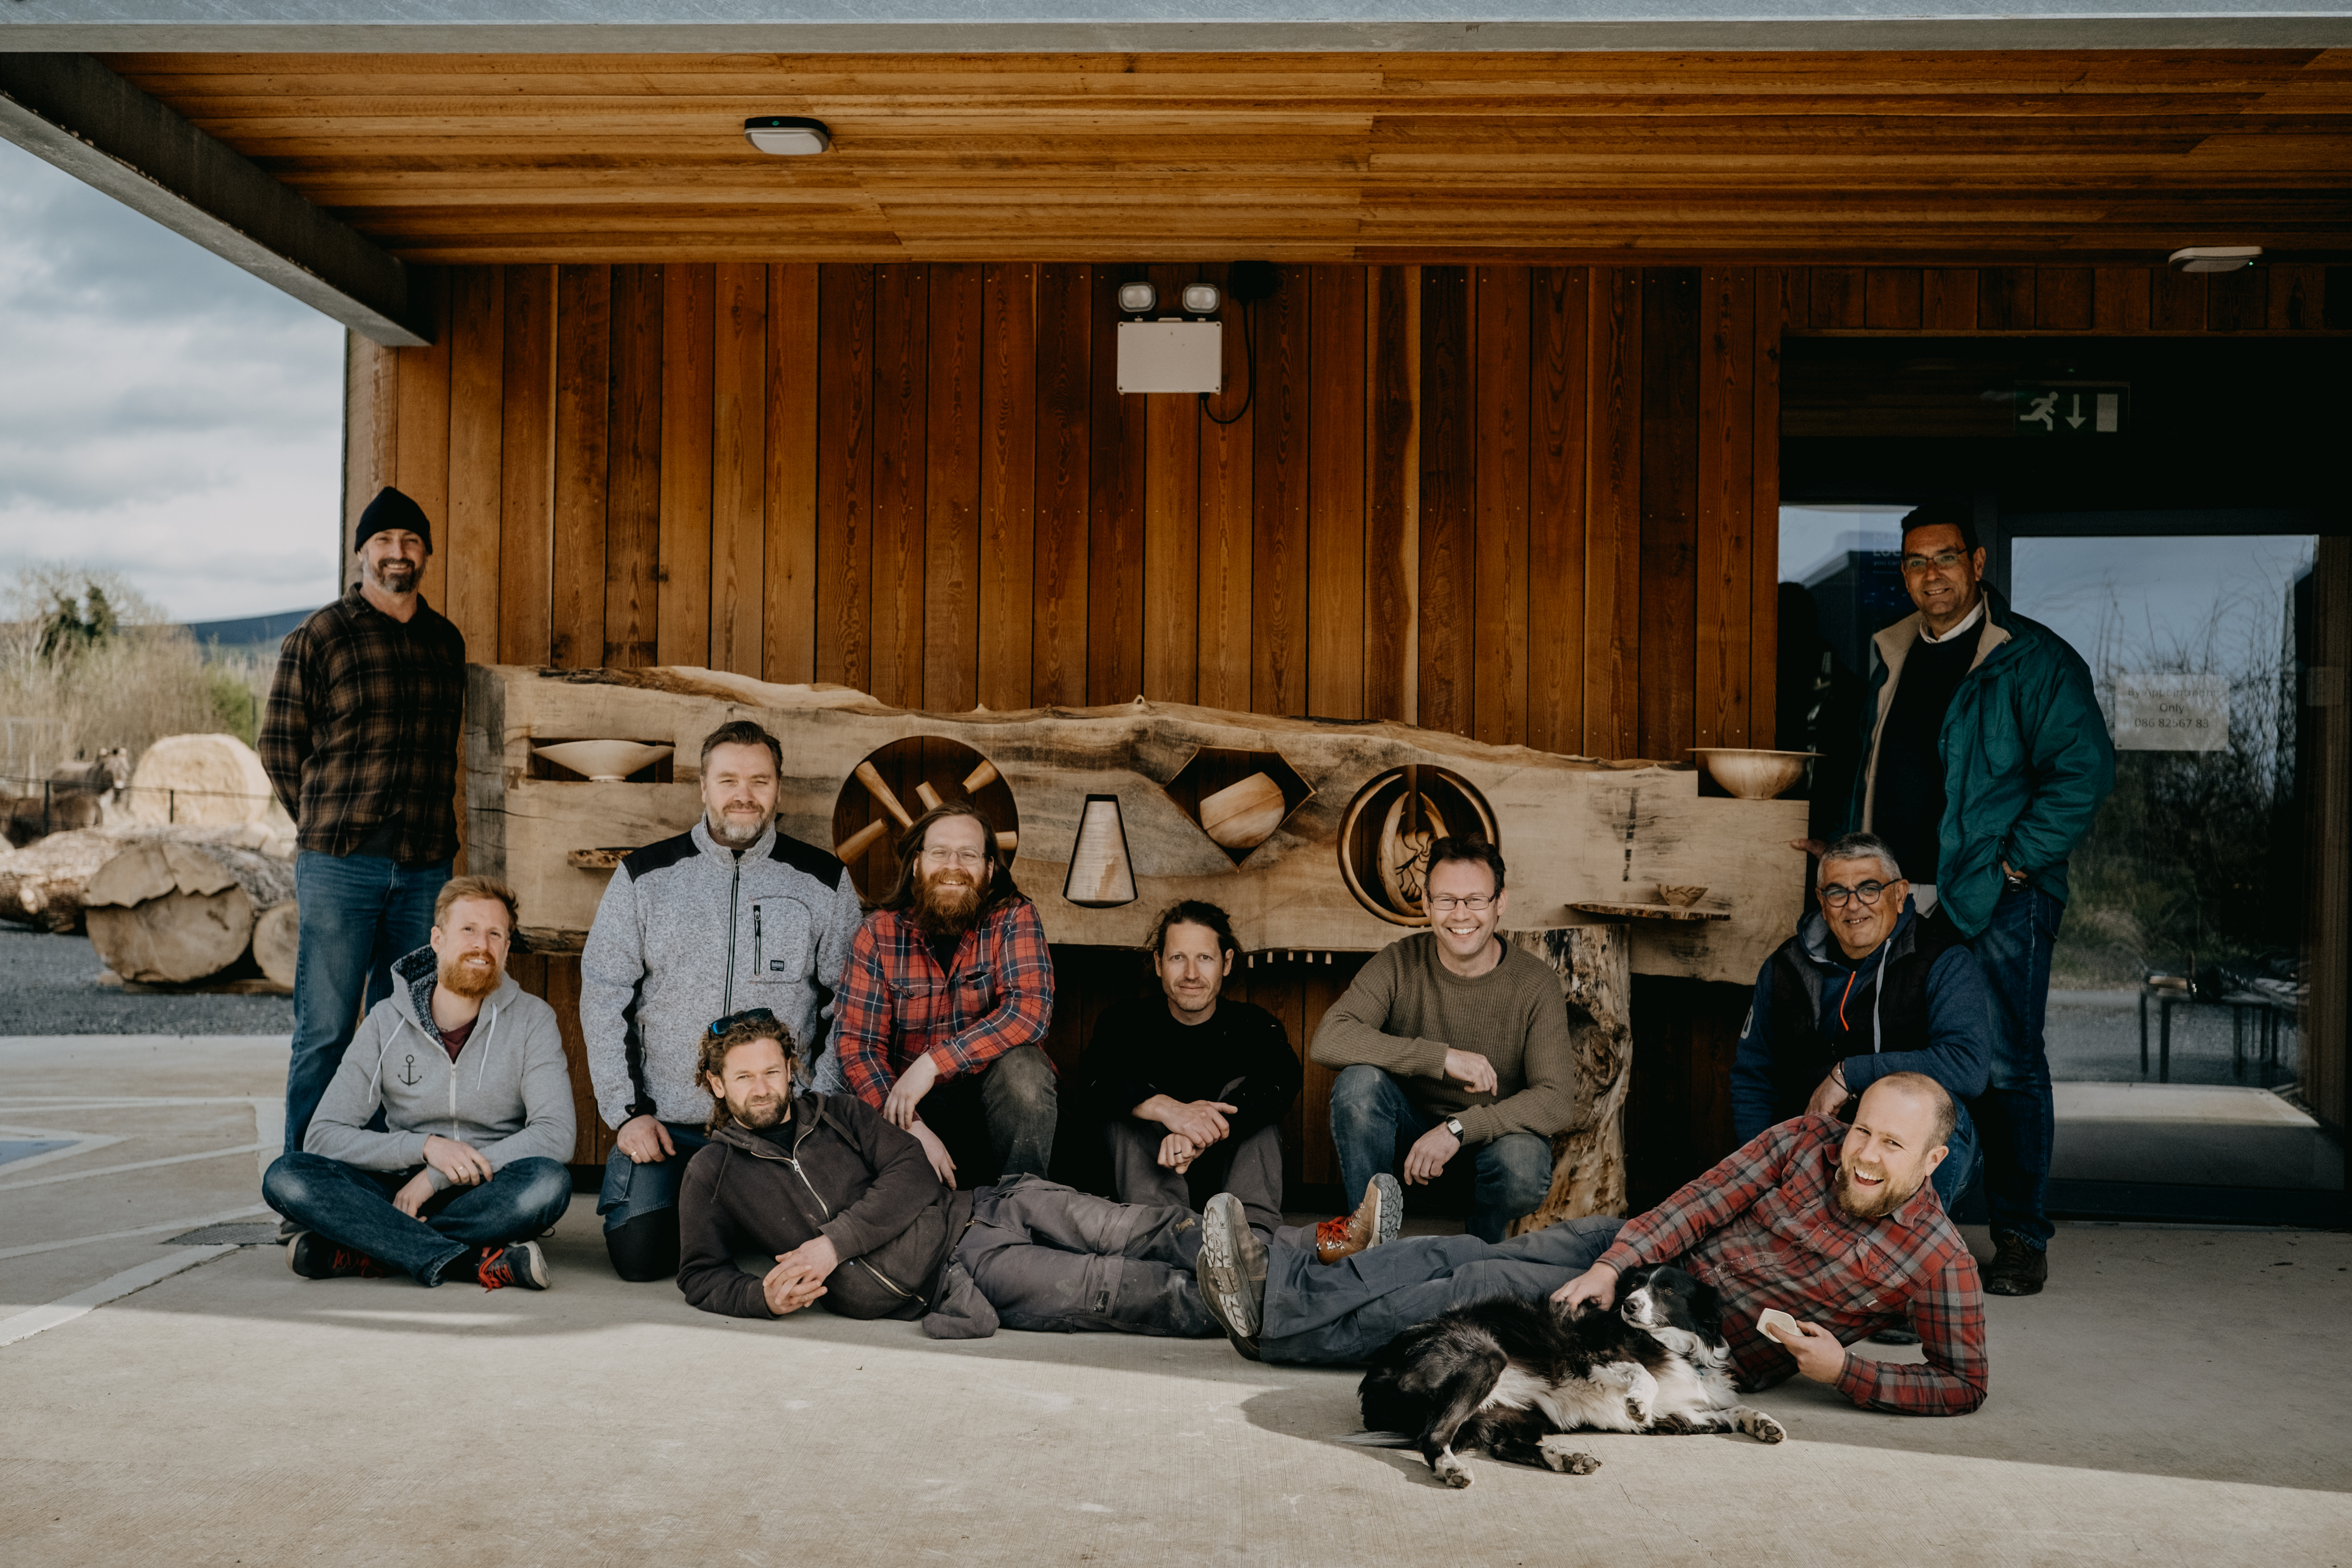 Carlow hosts creative professionals to collaborative timber experience. 